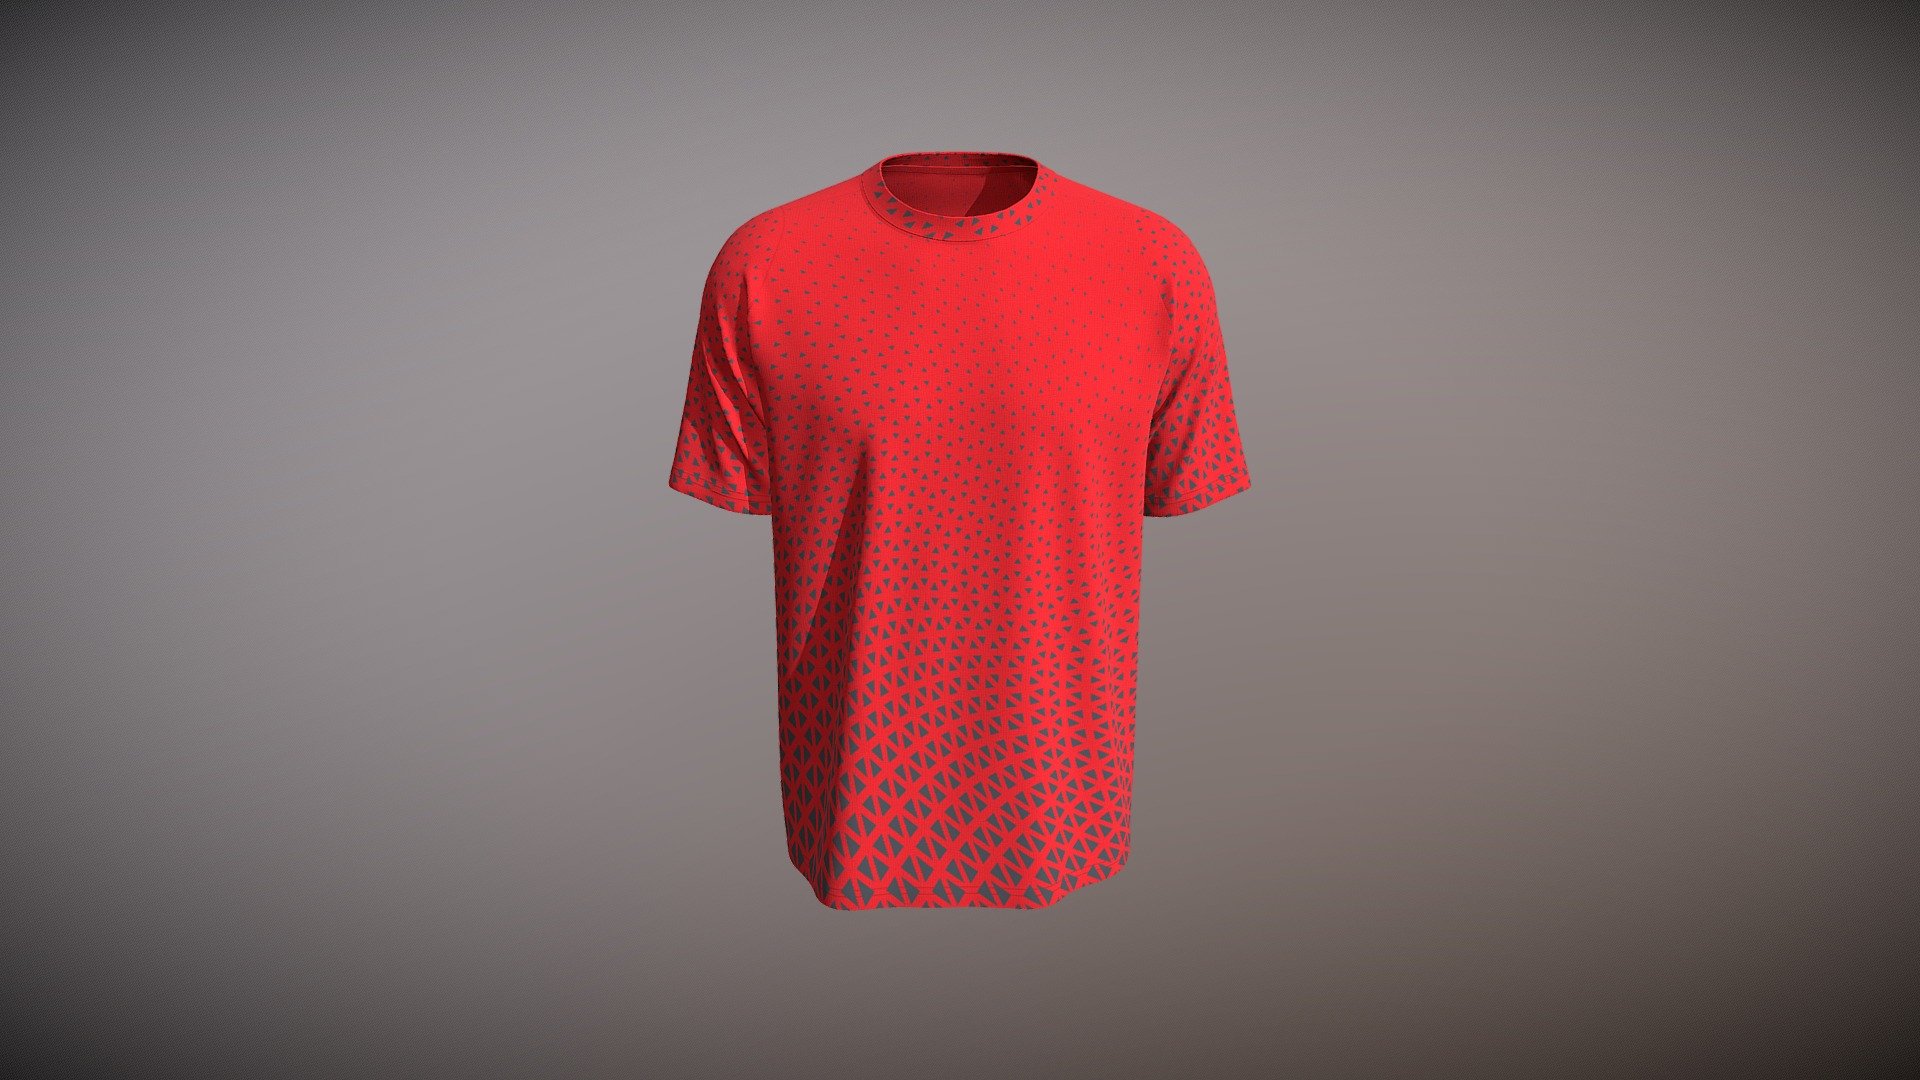 Cloth Title = Sporty T- Shirt Design Red Color  

SKU = DG100017 

Category = Men 

Product Type = T-Shirt 

Cloth Length = Regular 

Body Fit = Relaxed Fit 

Occasion = Casual  


Our Services:

3D Apparel Design.

OBJ,FBX,GLTF Making with High/Low Poly.

Fabric Digitalization.

Mockup making.

3D Teck Pack.

Pattern Making.

2D Illustration.

Cloth Animation and 360 Spin Video.


Contact us:- 

Email: info@digitalfashionwear.com 

Website: https://digitalfashionwear.com 

WhatsApp No: +8801759350445 


We designed all the types of cloth specially focused on product visualization, e-commerce, fitting, and production. 

We will design: 

T-shirts 

Polo shirts 

Hoodies 

Sweatshirt 

Jackets 

Shirts 

TankTops 

Trousers 

Bras 

Underwear 

Blazer 

Aprons 

Leggings 

and All Fashion items





Our goal is to make sure what we provide you, meets your demand 3d model